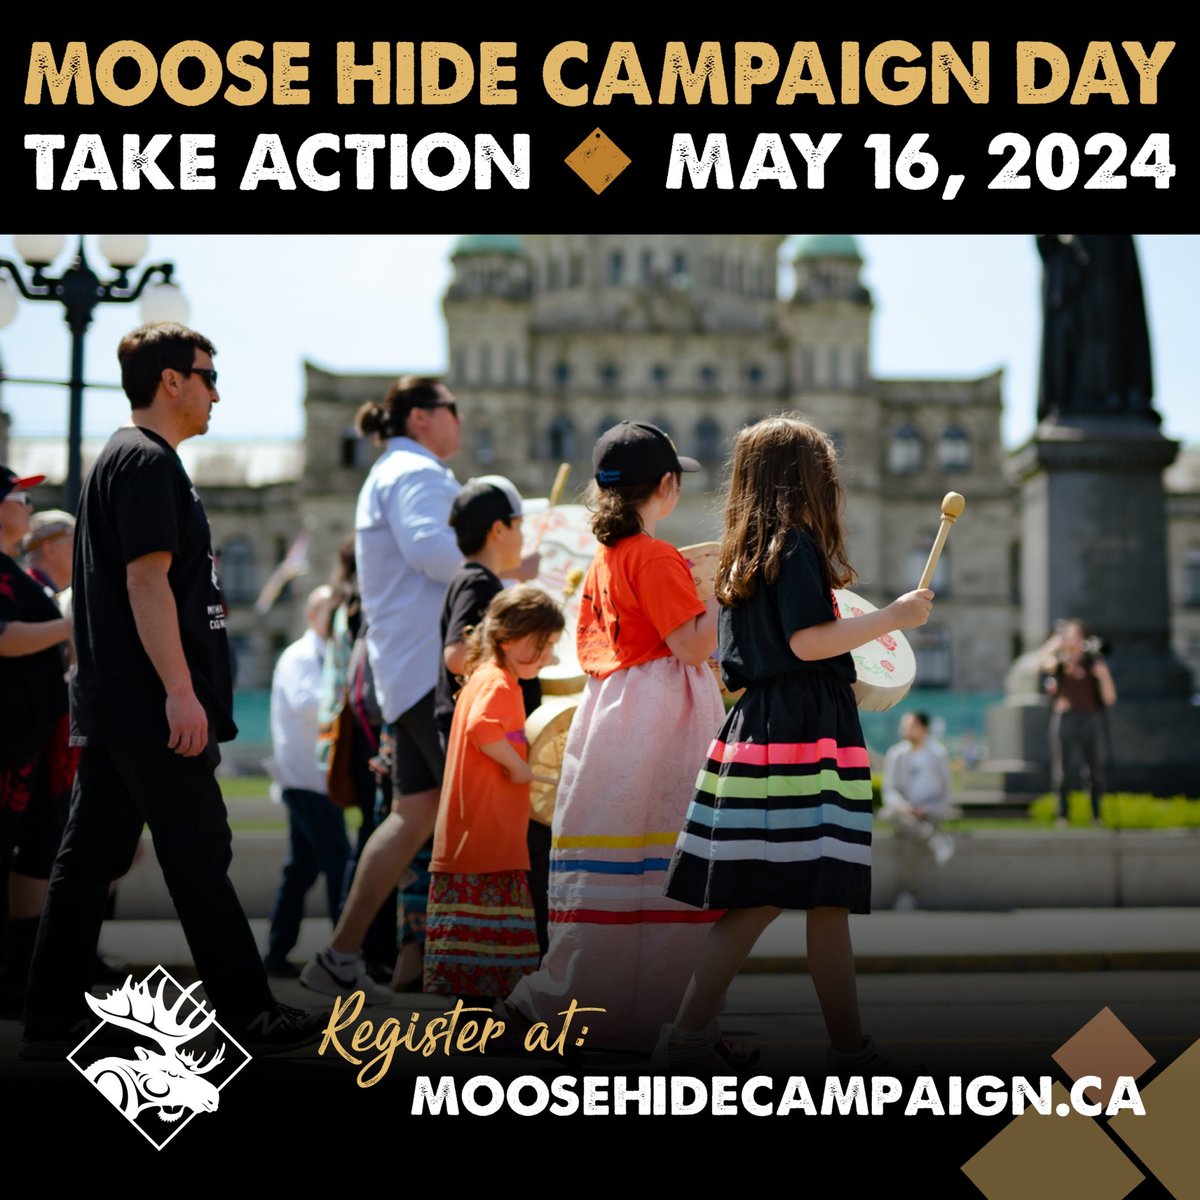 #MooseHideCampaignDay is a day of ceremony where all Canadians are called to join together to take a stand against violence towards women and children and to take practical steps for our collective journey of #reconciliation. Together, we can make a difference!